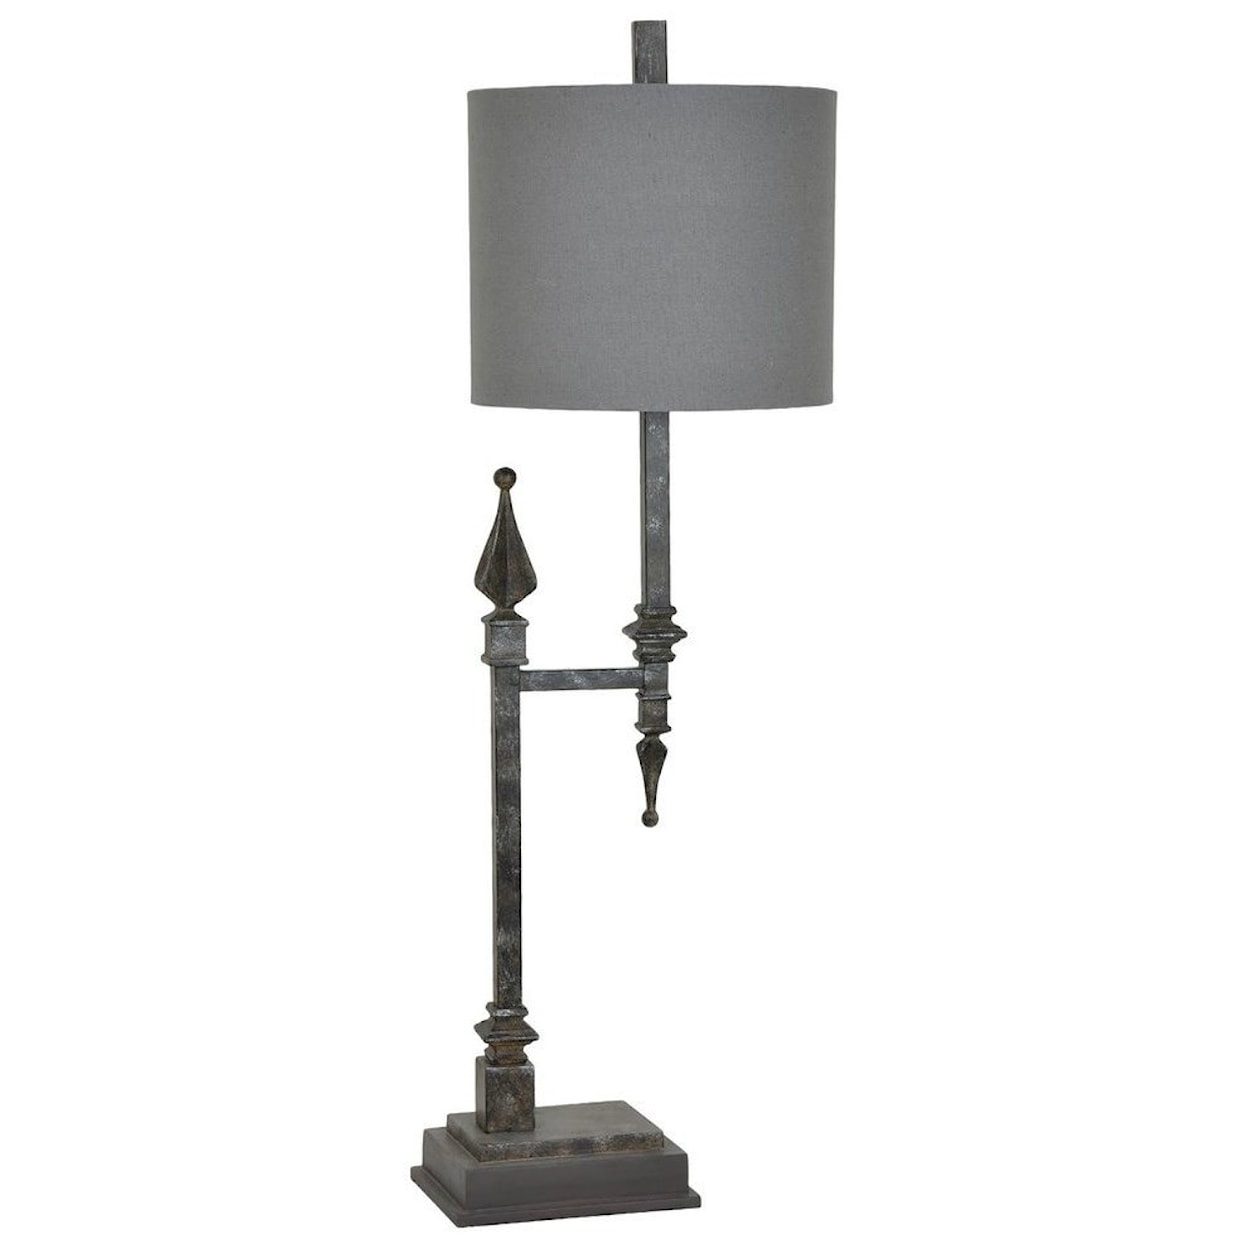 Crestview Collection Lighting Gate Table Lamp